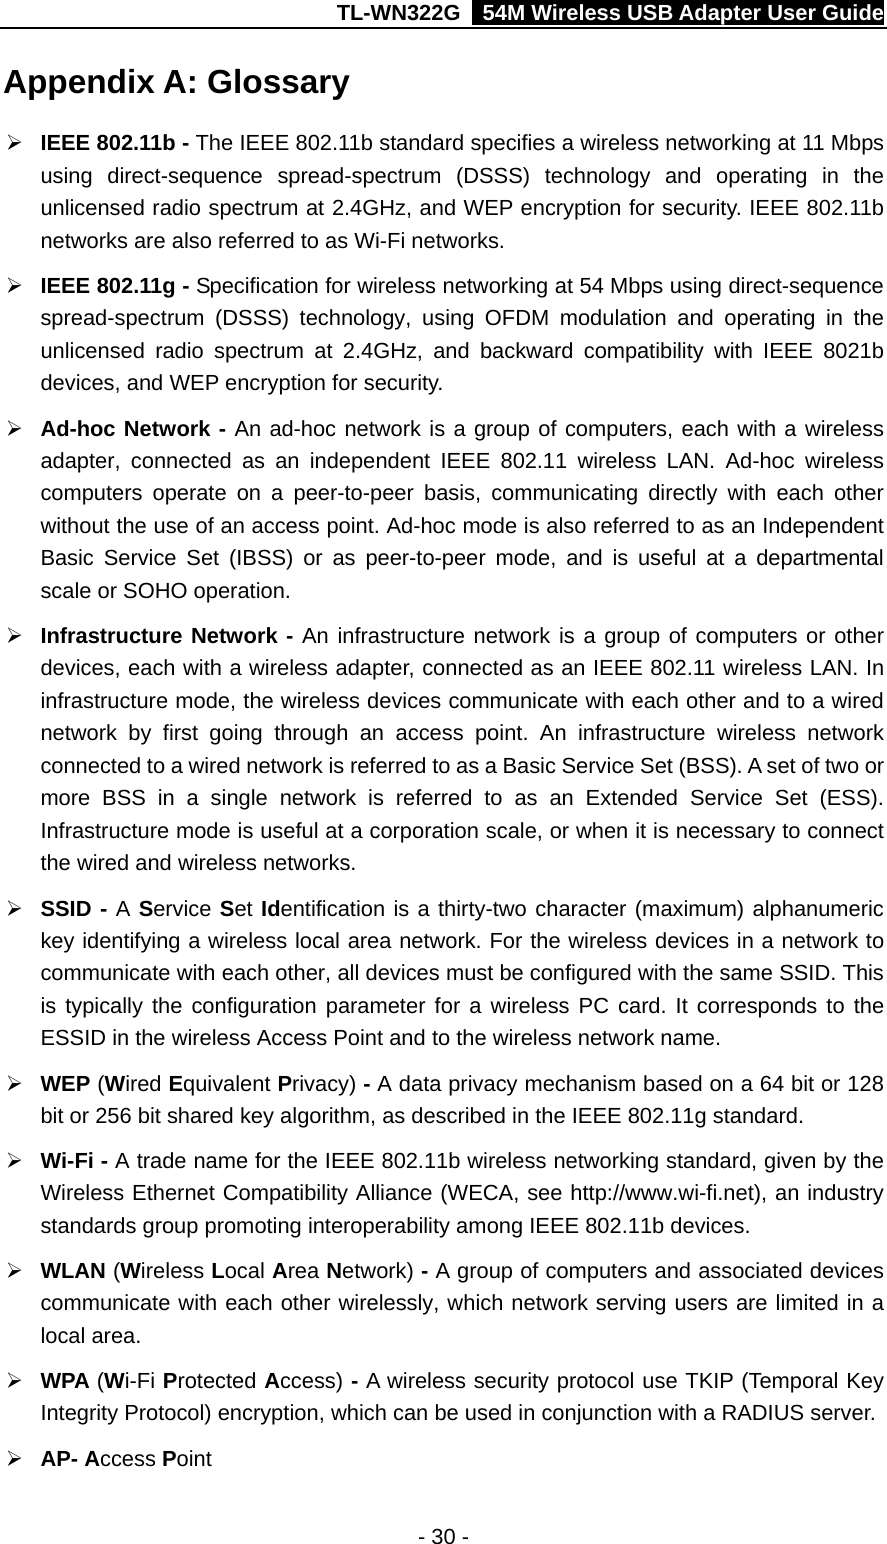 TL-WN322G    54M Wireless USB Adapter User Guide Appendix A: Glossary ¾ IEEE 802.11b - The IEEE 802.11b standard specifies a wireless networking at 11 Mbps using direct-sequence spread-spectrum (DSSS) technology and operating in the unlicensed radio spectrum at 2.4GHz, and WEP encryption for security. IEEE 802.11b networks are also referred to as Wi-Fi networks. ¾ IEEE 802.11g - Specification for wireless networking at 54 Mbps using direct-sequence spread-spectrum (DSSS) technology, using OFDM modulation and operating in the unlicensed radio spectrum at 2.4GHz, and backward compatibility with IEEE 8021b devices, and WEP encryption for security. ¾ Ad-hoc Network - An ad-hoc network is a group of computers, each with a wireless adapter, connected as an independent IEEE 802.11 wireless LAN. Ad-hoc wireless computers operate on a peer-to-peer basis, communicating directly with each other without the use of an access point. Ad-hoc mode is also referred to as an Independent Basic Service Set (IBSS) or as peer-to-peer mode, and is useful at a departmental scale or SOHO operation. ¾ Infrastructure Network - An infrastructure network is a group of computers or other devices, each with a wireless adapter, connected as an IEEE 802.11 wireless LAN. In infrastructure mode, the wireless devices communicate with each other and to a wired network by first going through an access point. An infrastructure wireless network connected to a wired network is referred to as a Basic Service Set (BSS). A set of two or more BSS in a single network is referred to as an Extended Service Set (ESS). Infrastructure mode is useful at a corporation scale, or when it is necessary to connect the wired and wireless networks. ¾ SSID - A Service Set Identification is a thirty-two character (maximum) alphanumeric key identifying a wireless local area network. For the wireless devices in a network to communicate with each other, all devices must be configured with the same SSID. This is typically the configuration parameter for a wireless PC card. It corresponds to the ESSID in the wireless Access Point and to the wireless network name.   ¾ WEP (Wired Equivalent Privacy) - A data privacy mechanism based on a 64 bit or 128 bit or 256 bit shared key algorithm, as described in the IEEE 802.11g standard.   ¾ Wi-Fi - A trade name for the IEEE 802.11b wireless networking standard, given by the Wireless Ethernet Compatibility Alliance (WECA, see http://www.wi-fi.net), an industry standards group promoting interoperability among IEEE 802.11b devices. ¾ WLAN (Wireless Local Area Network) - A group of computers and associated devices communicate with each other wirelessly, which network serving users are limited in a local area. ¾ WPA (Wi-Fi Protected Access) - A wireless security protocol use TKIP (Temporal Key Integrity Protocol) encryption, which can be used in conjunction with a RADIUS server. ¾ AP- Access Point - 30 - 